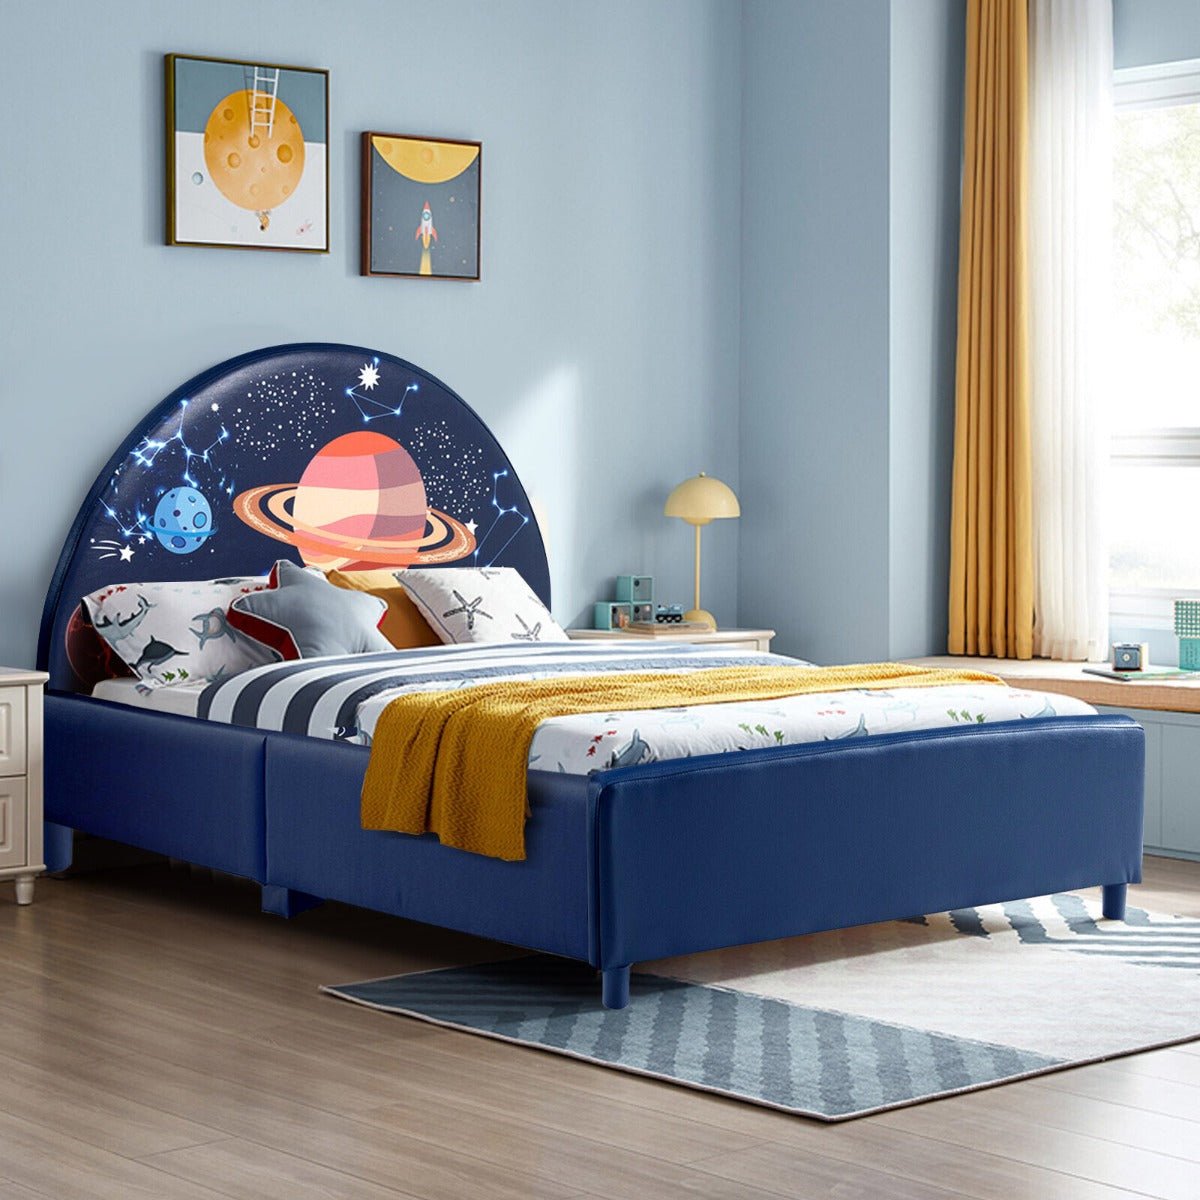 Blue Planetary Single Bed for Kids